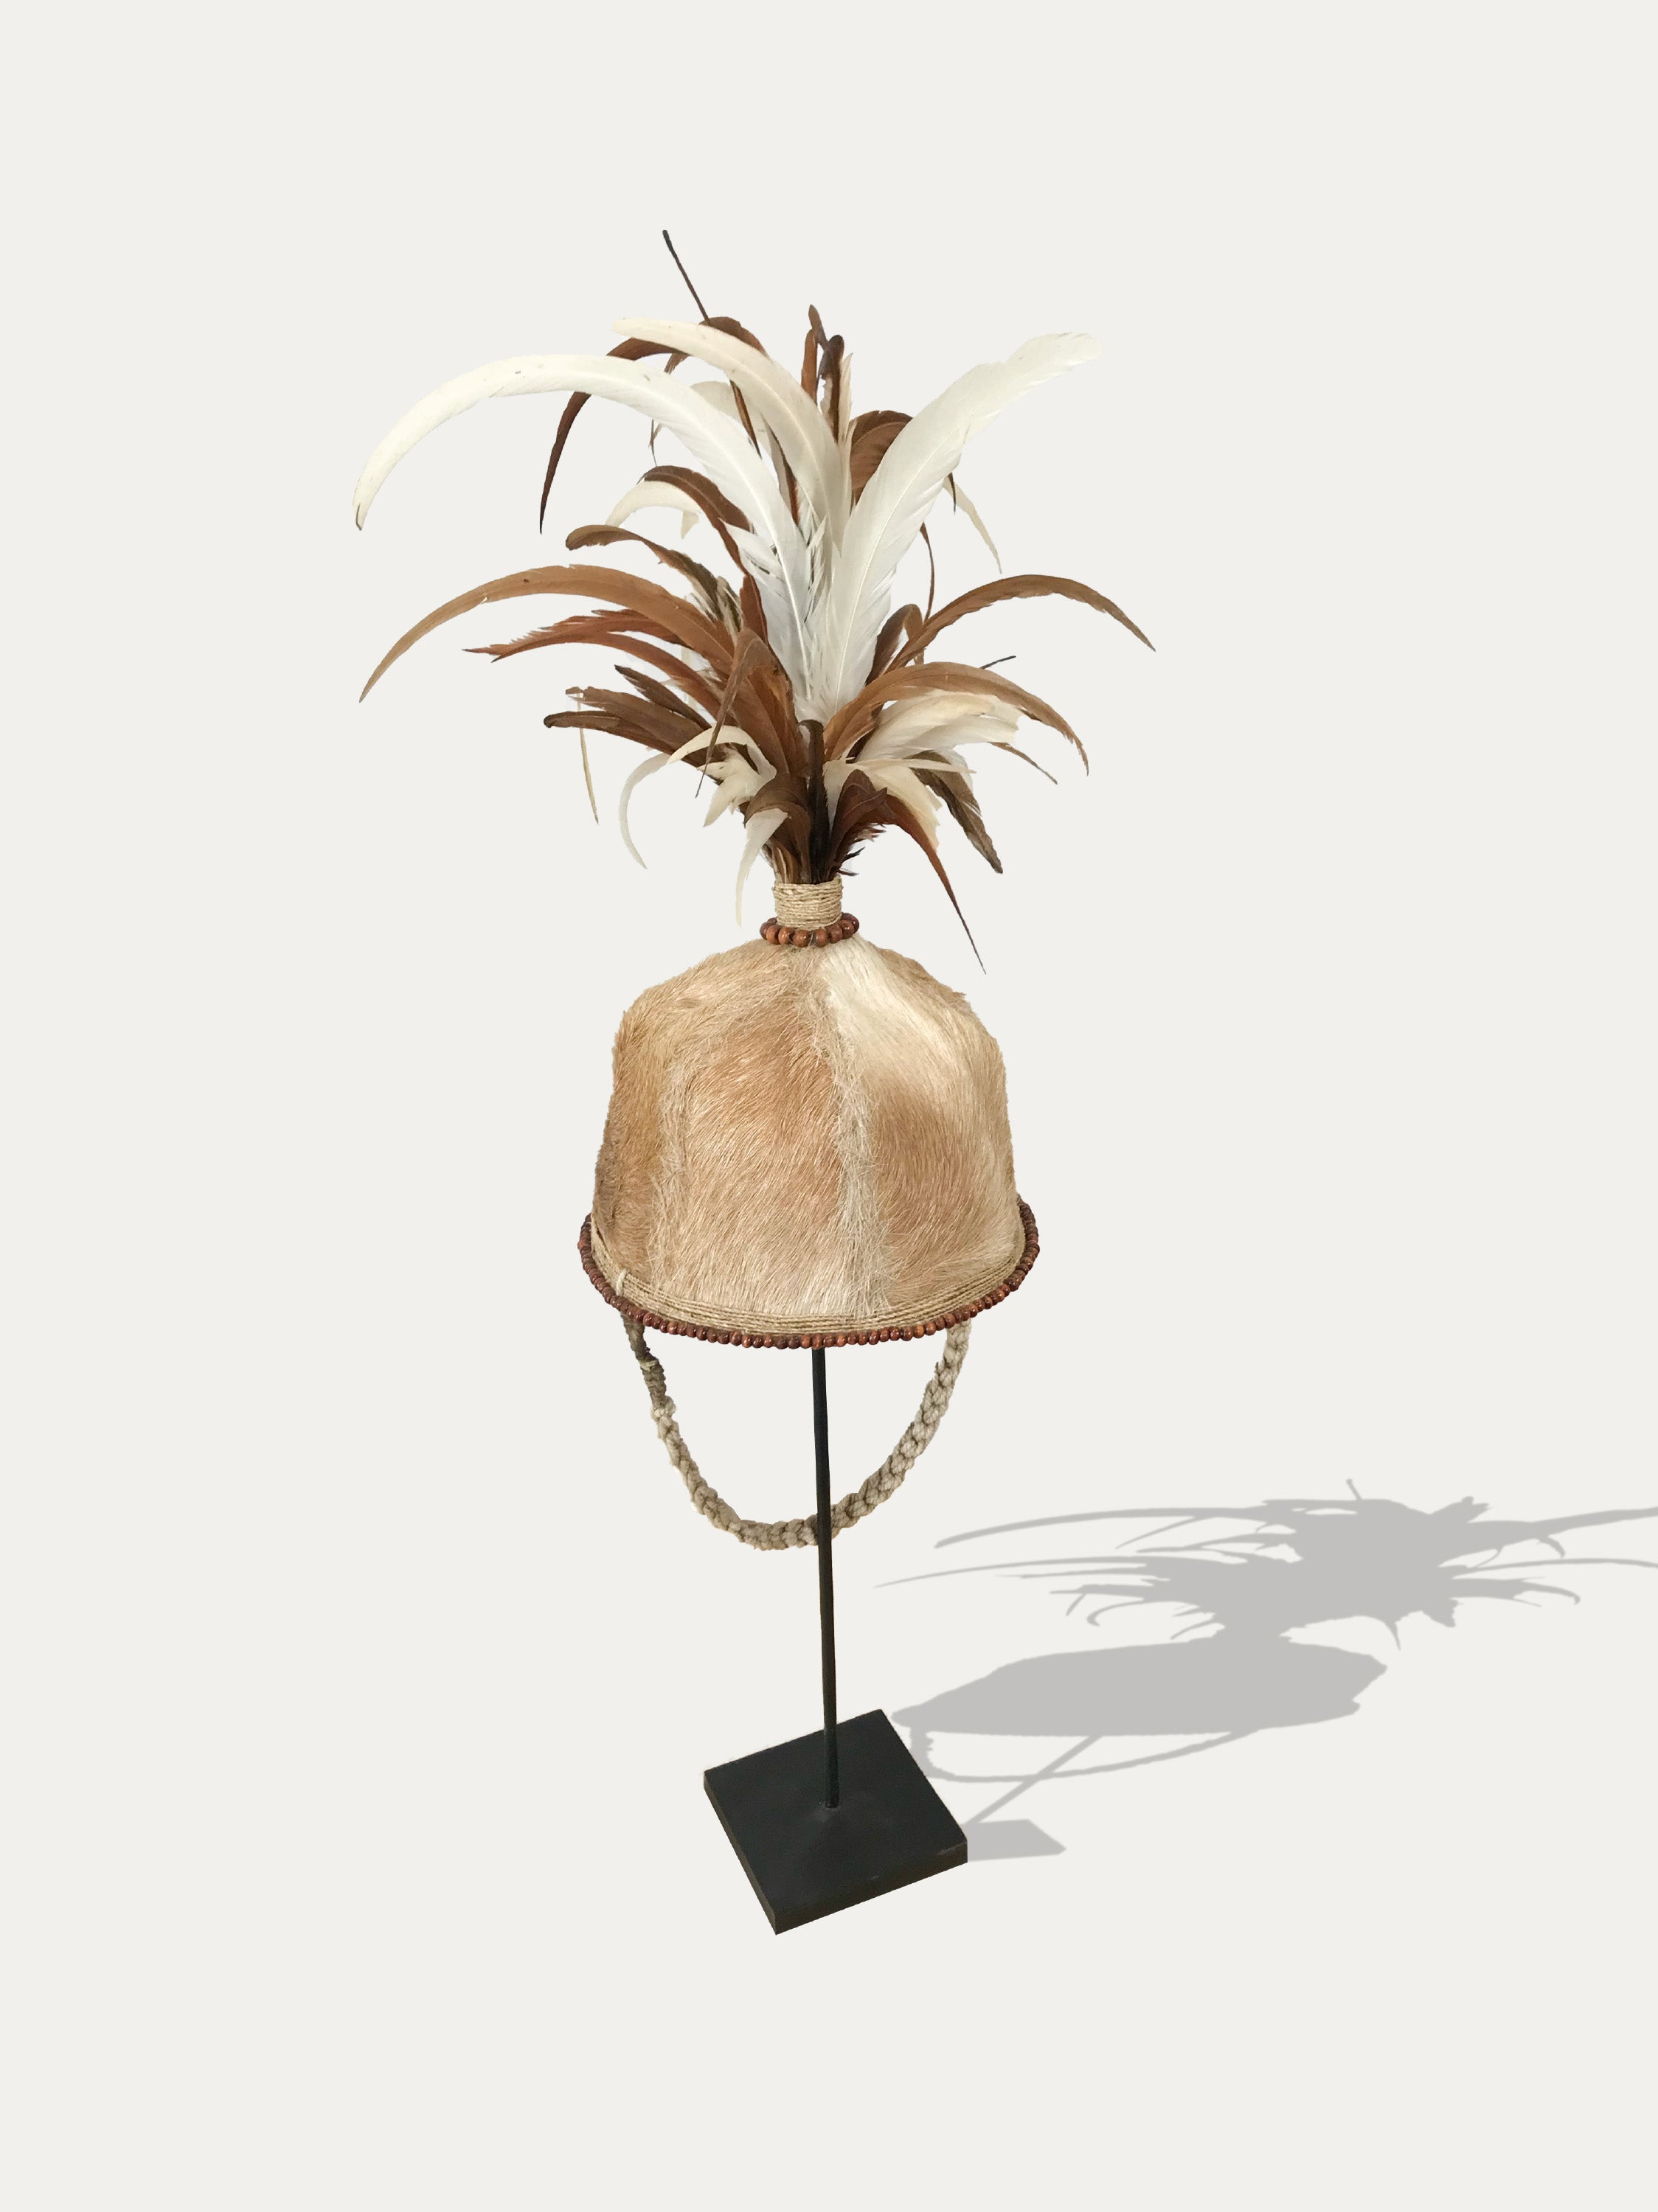 Hunters hat from Papua - Asian Art from Kirschon